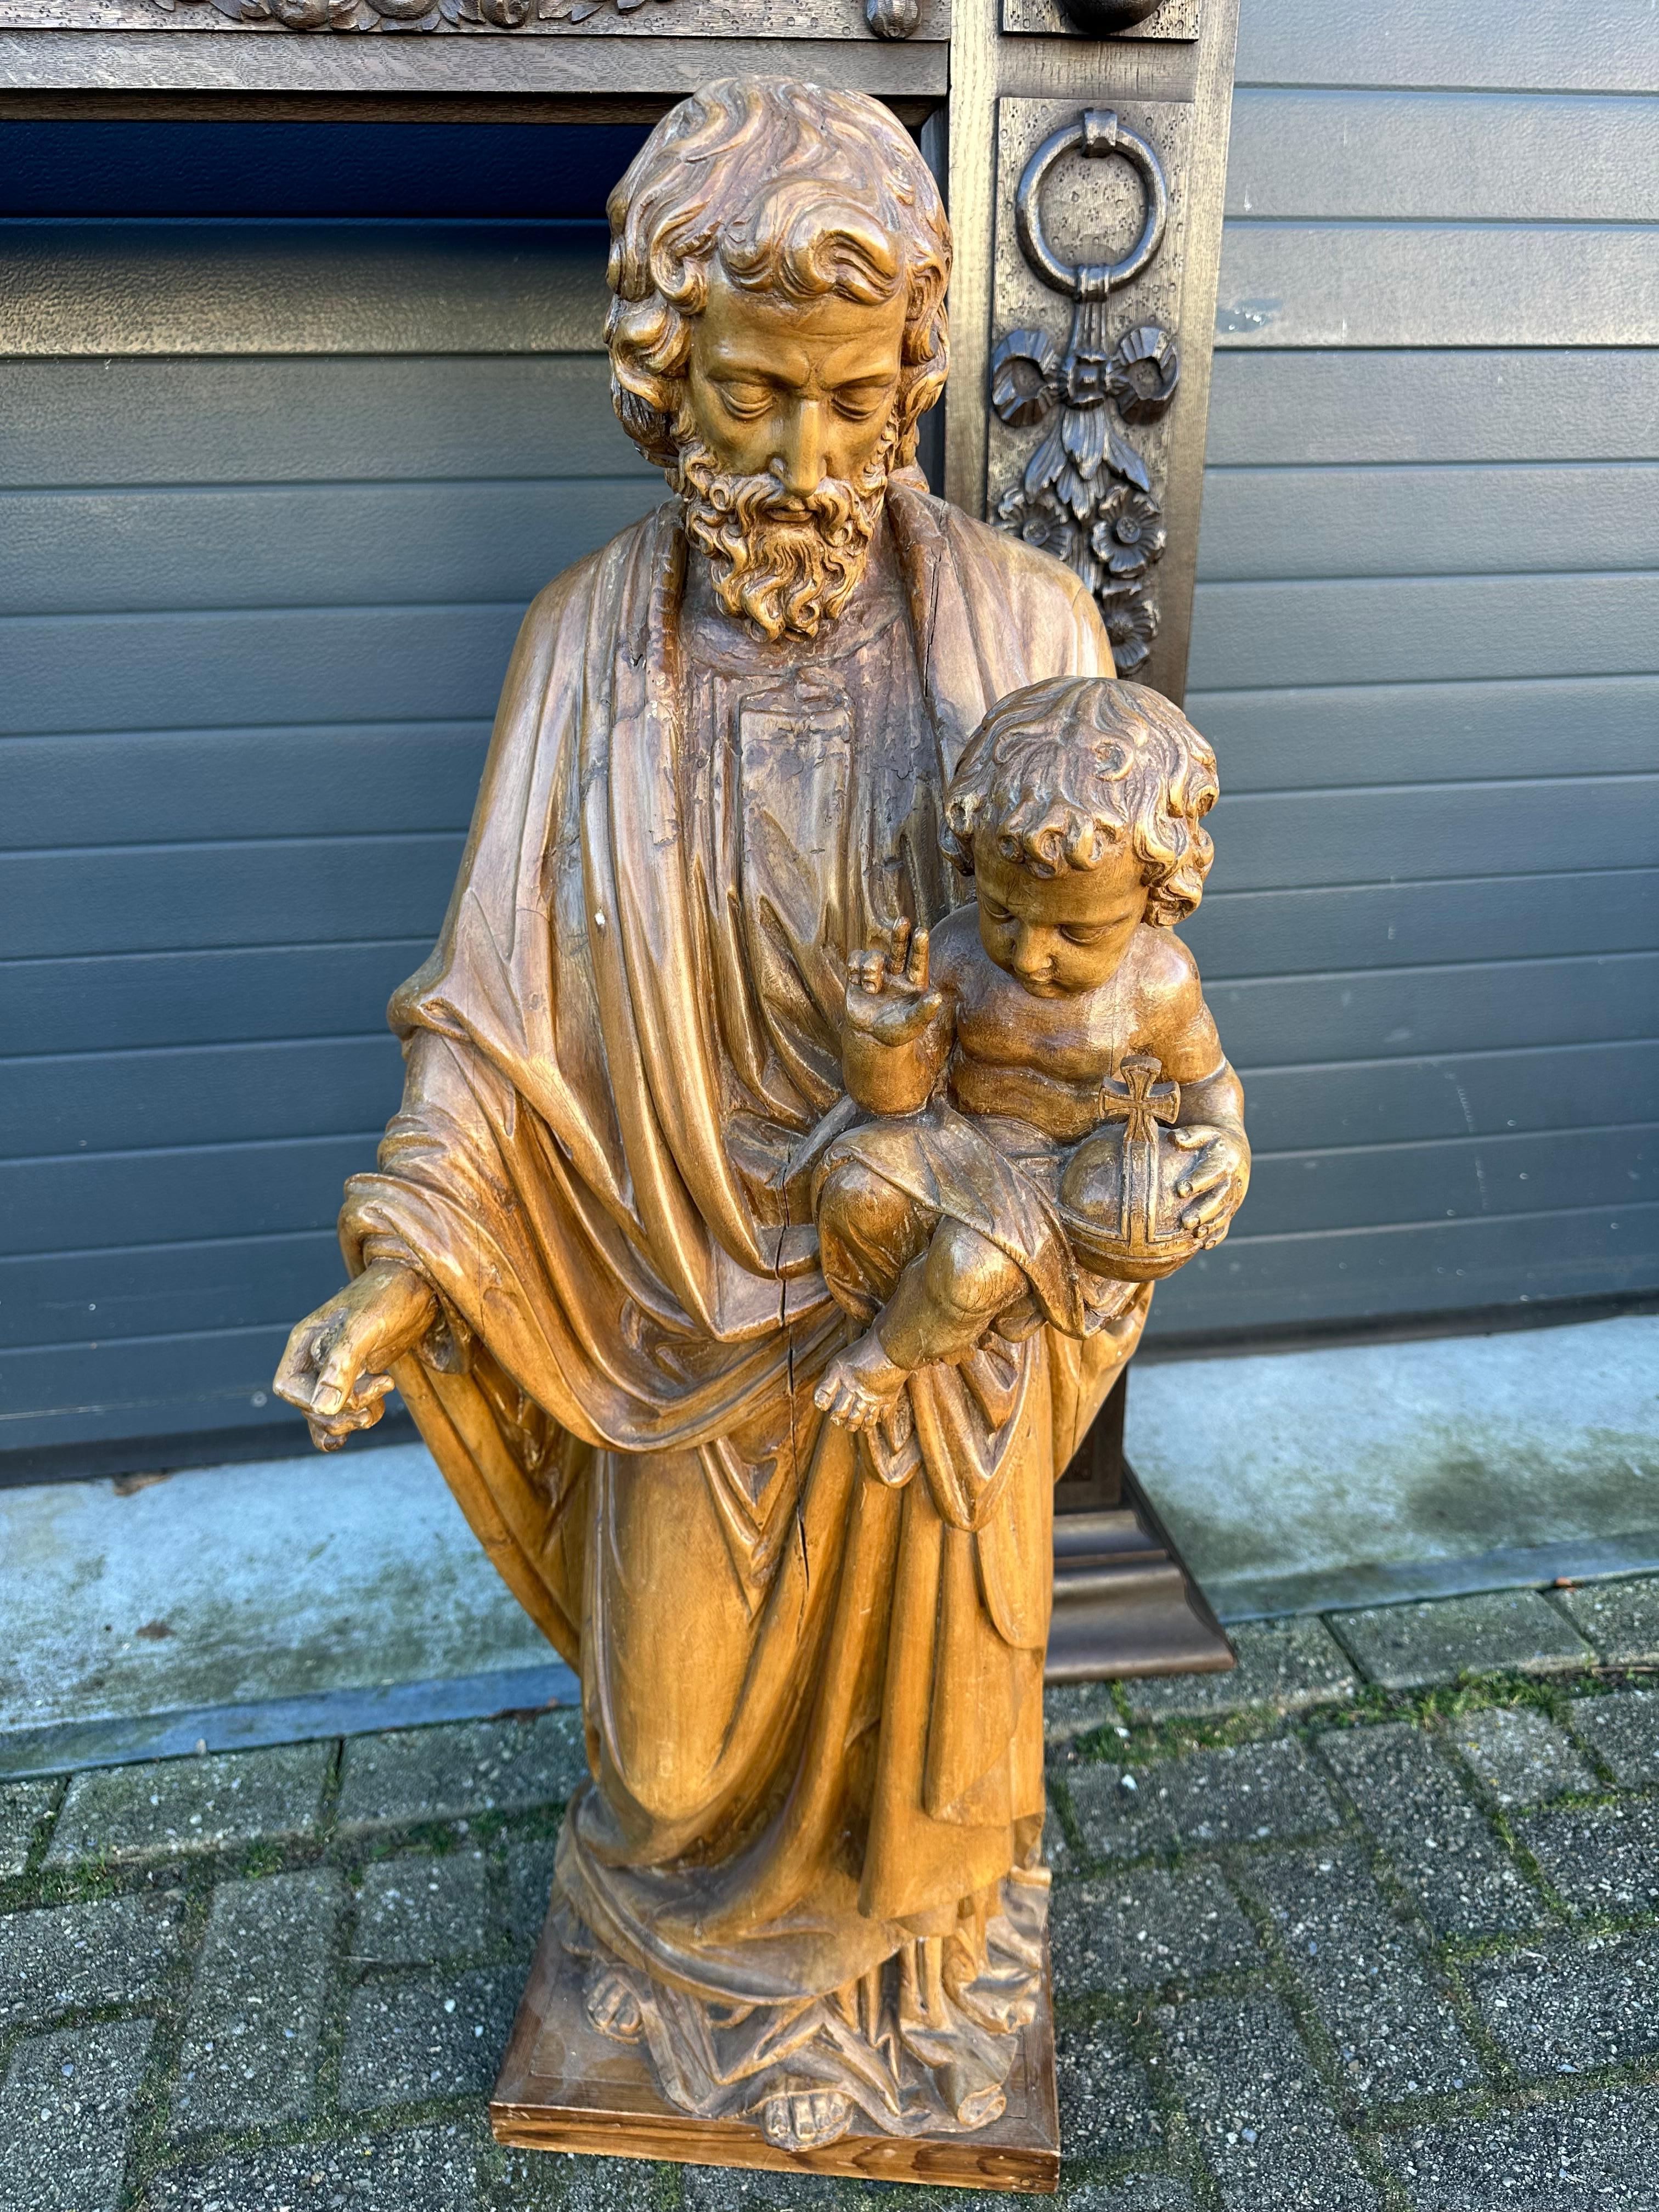 19th Century Antique Hand Carved Large Size Statue of Saint Joseph and Child Jesus Sculpture For Sale